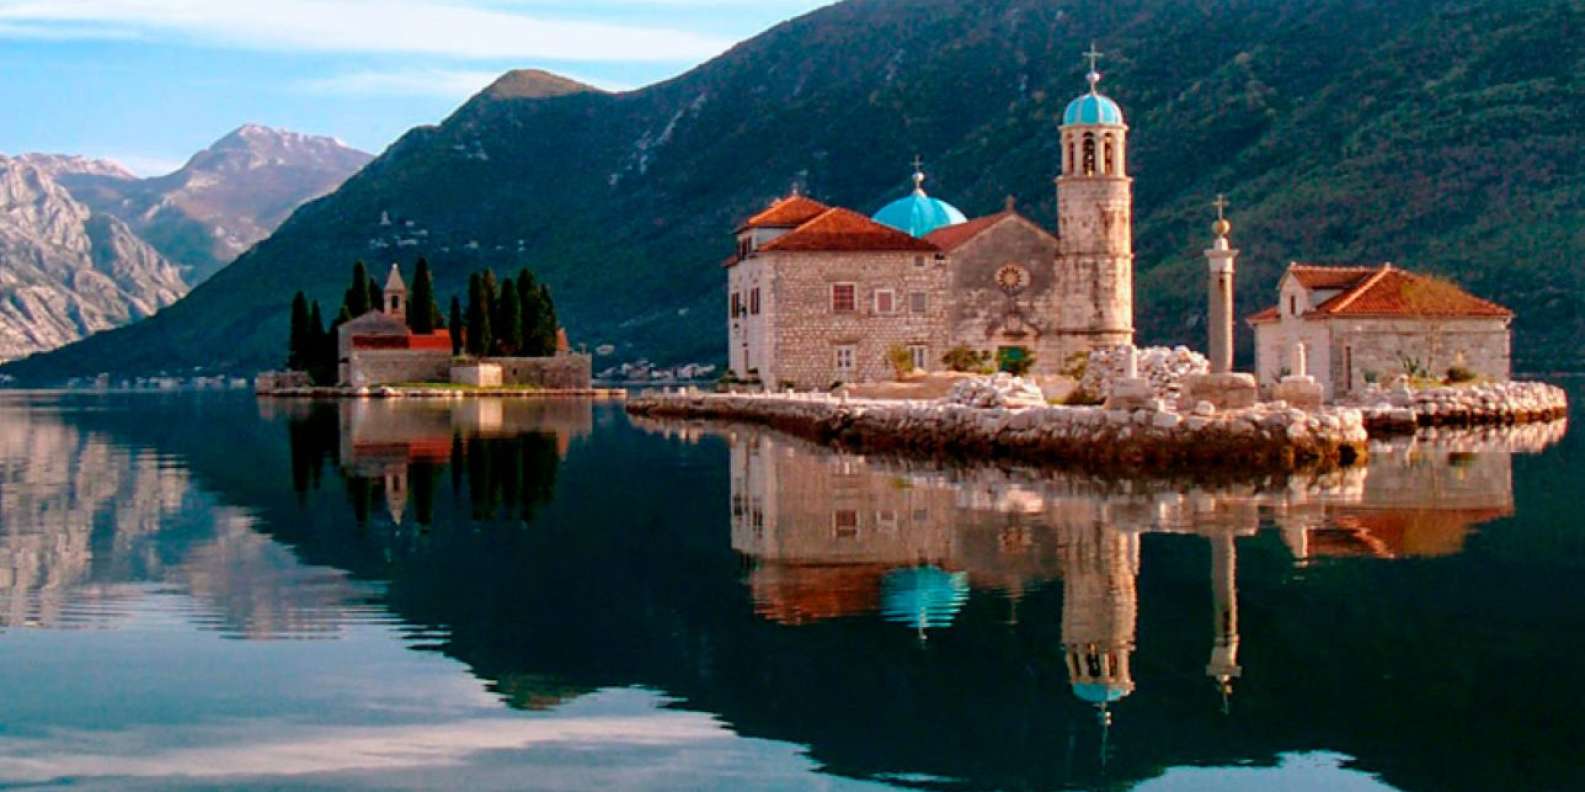 What to do in Kotor